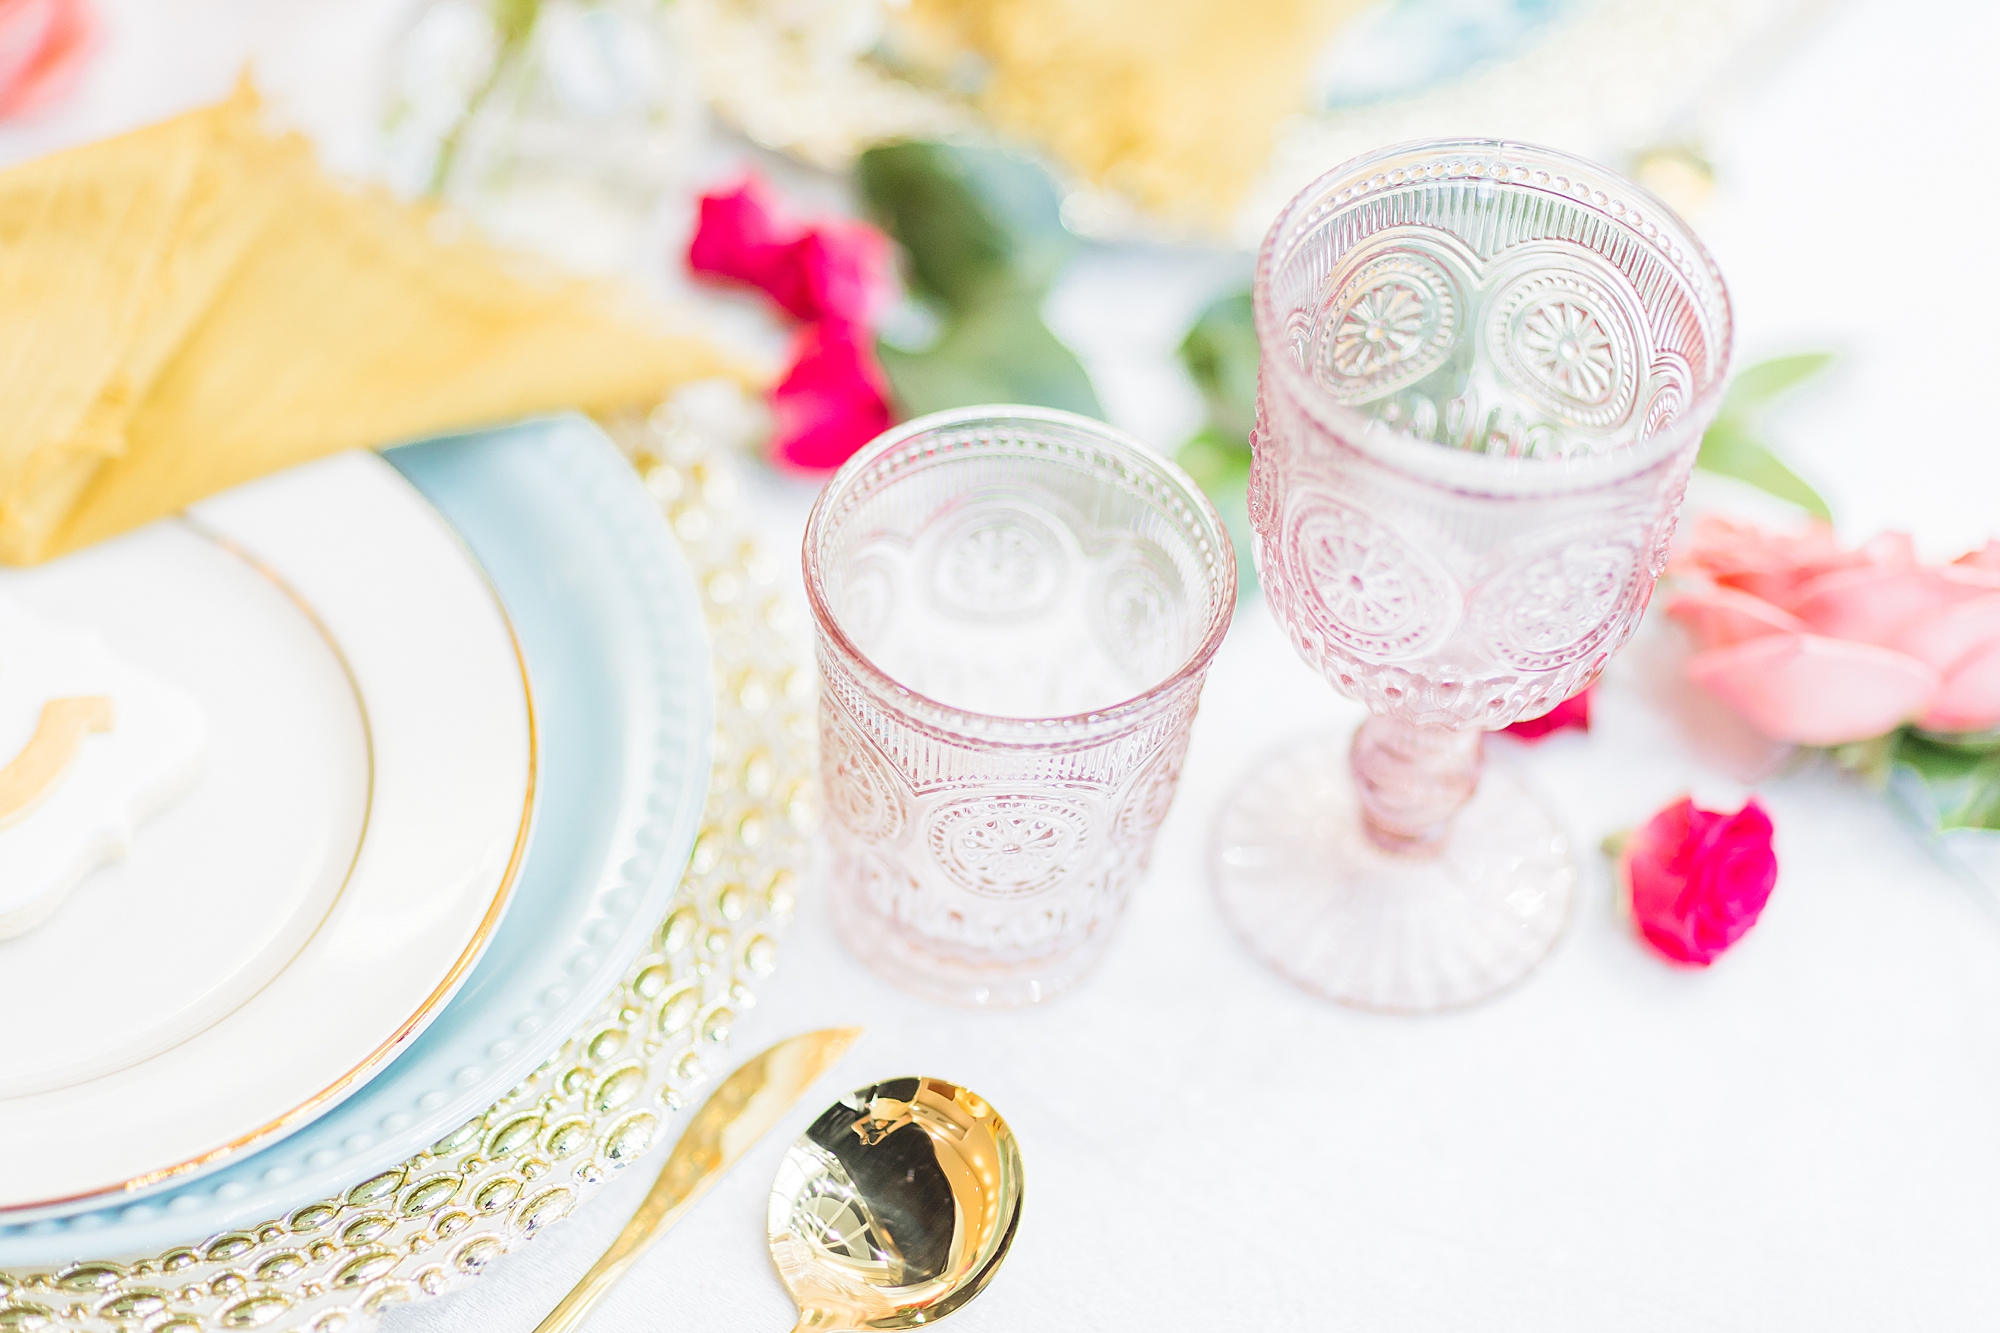 vintage glass details for place settings at springtime wedding styled shoot